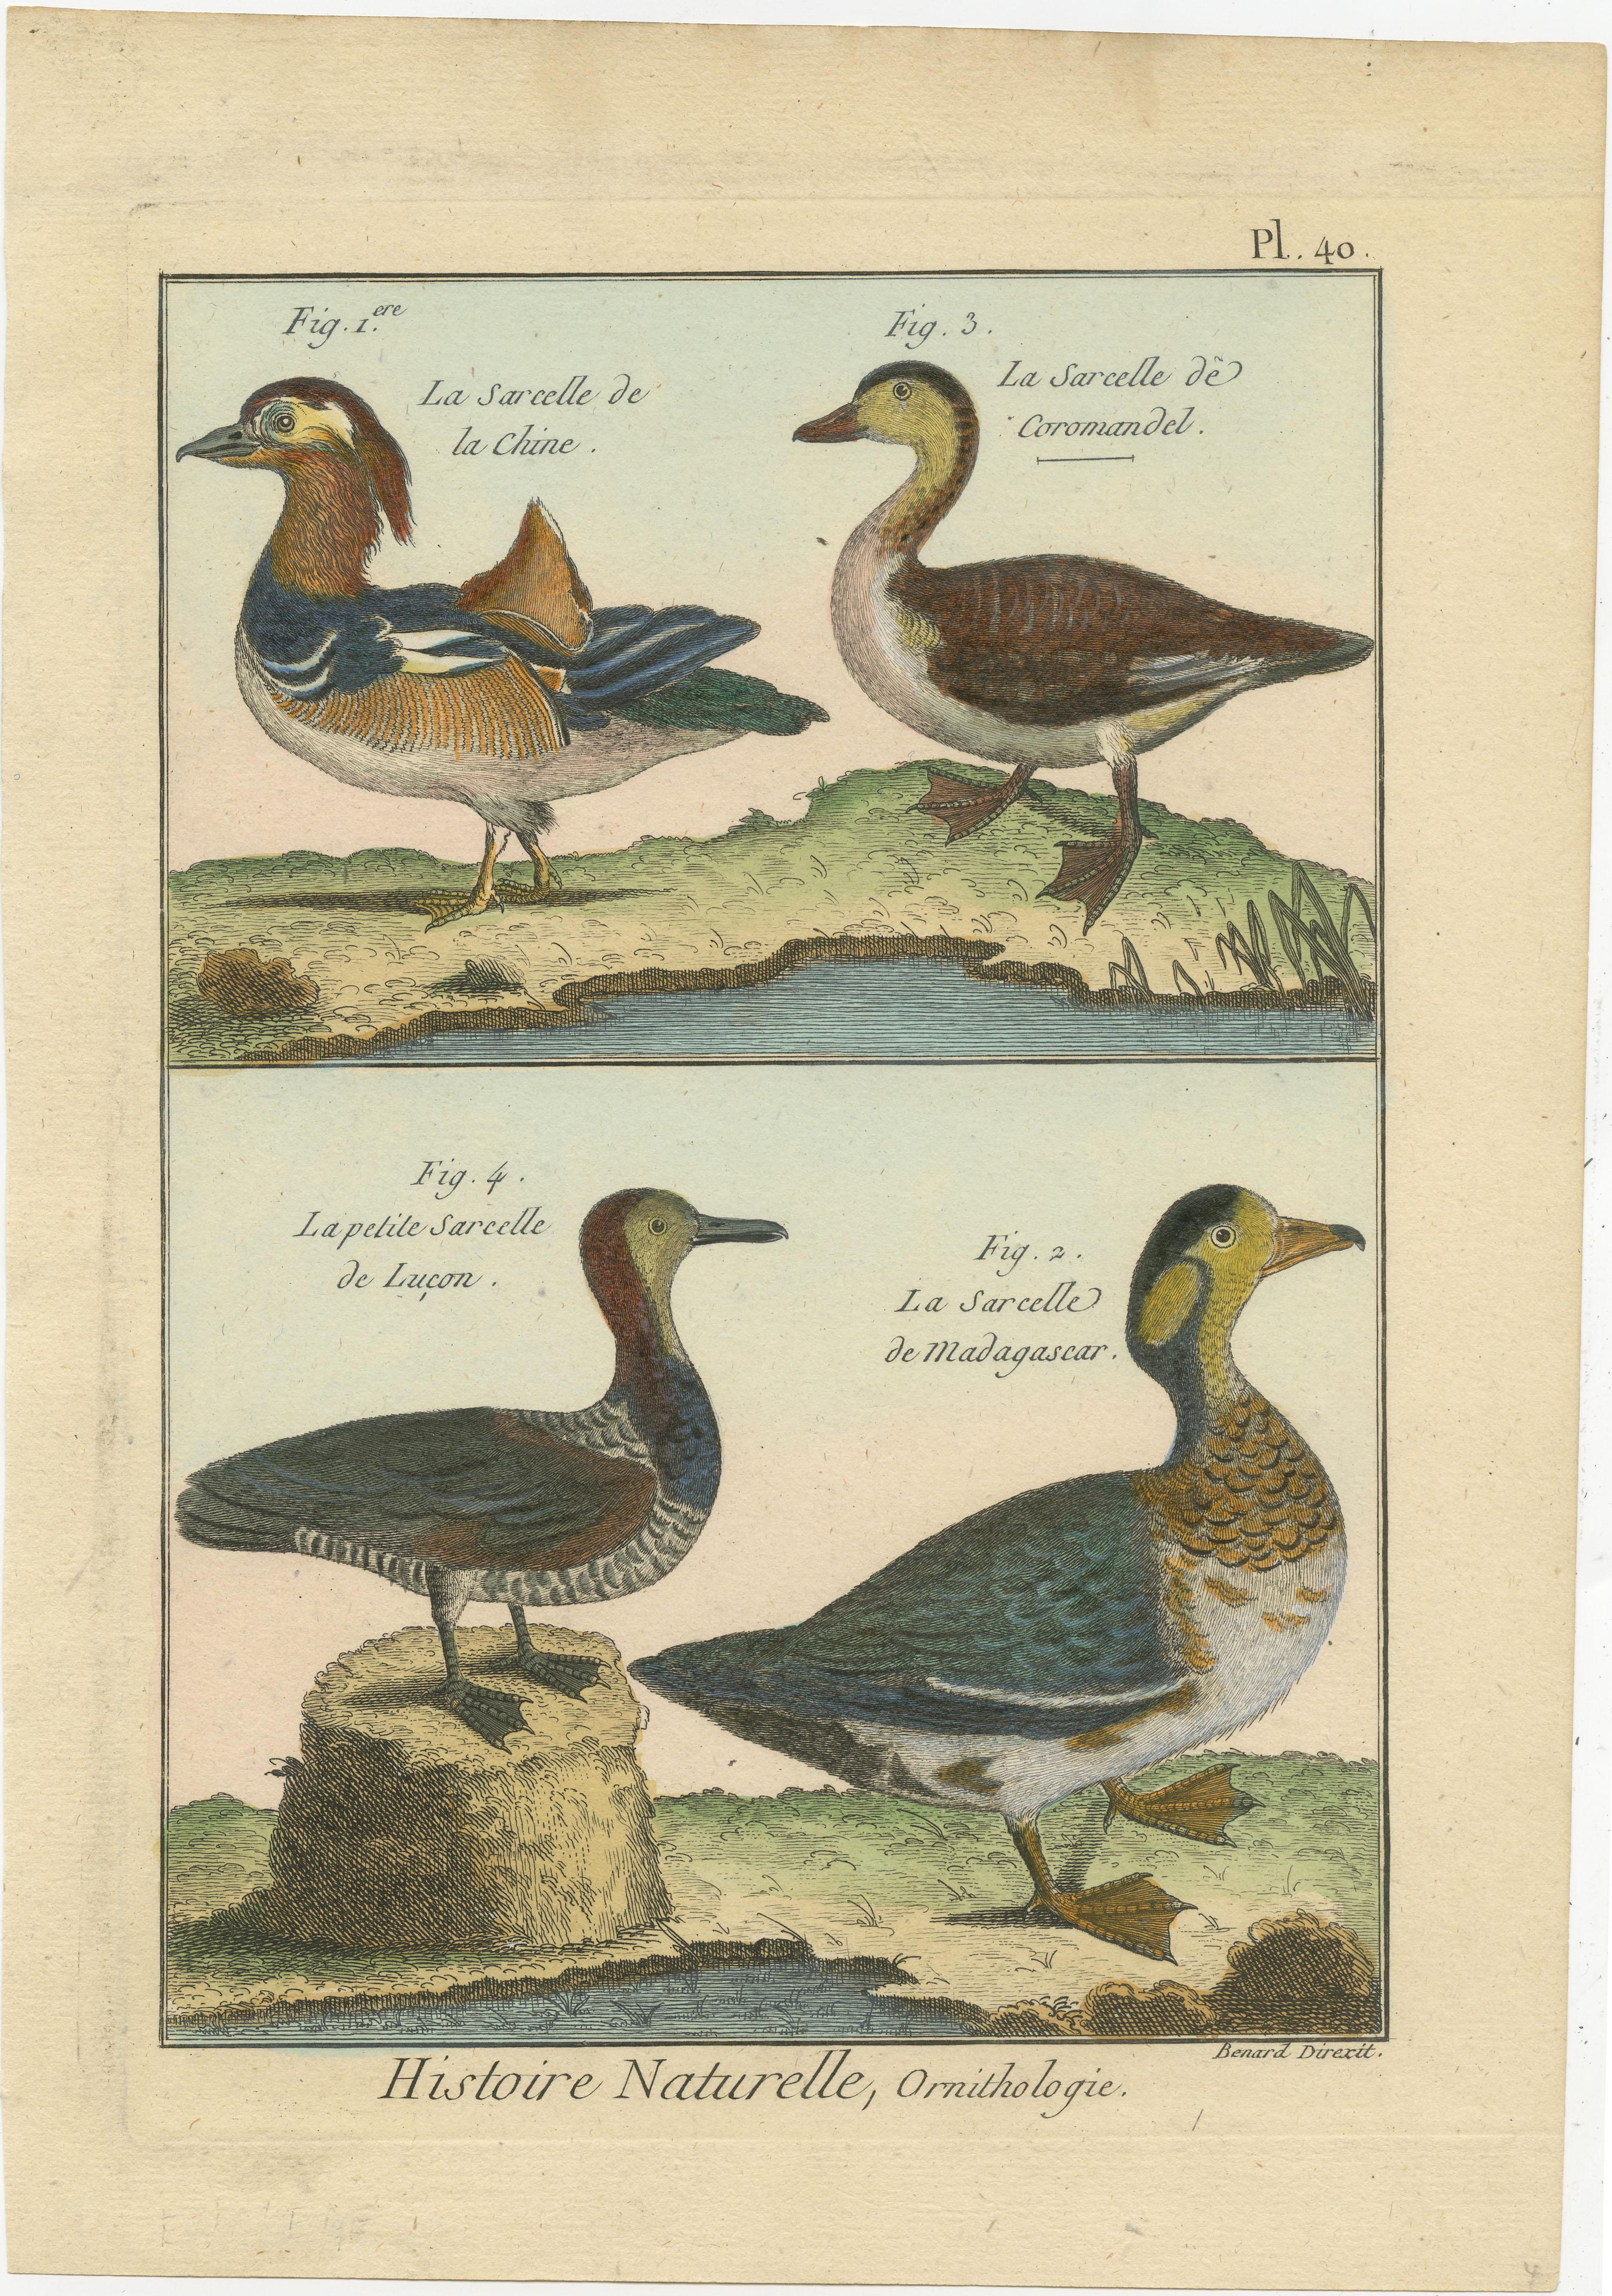 An authentic, perfect and bright, originally hand-colored, illustration of 4 Ducks, on parchment paper (copper engraving). It has a fine shining because of the authenticly applied egg-yolk as varnish. The Artist is Robert Bernard (1792). The